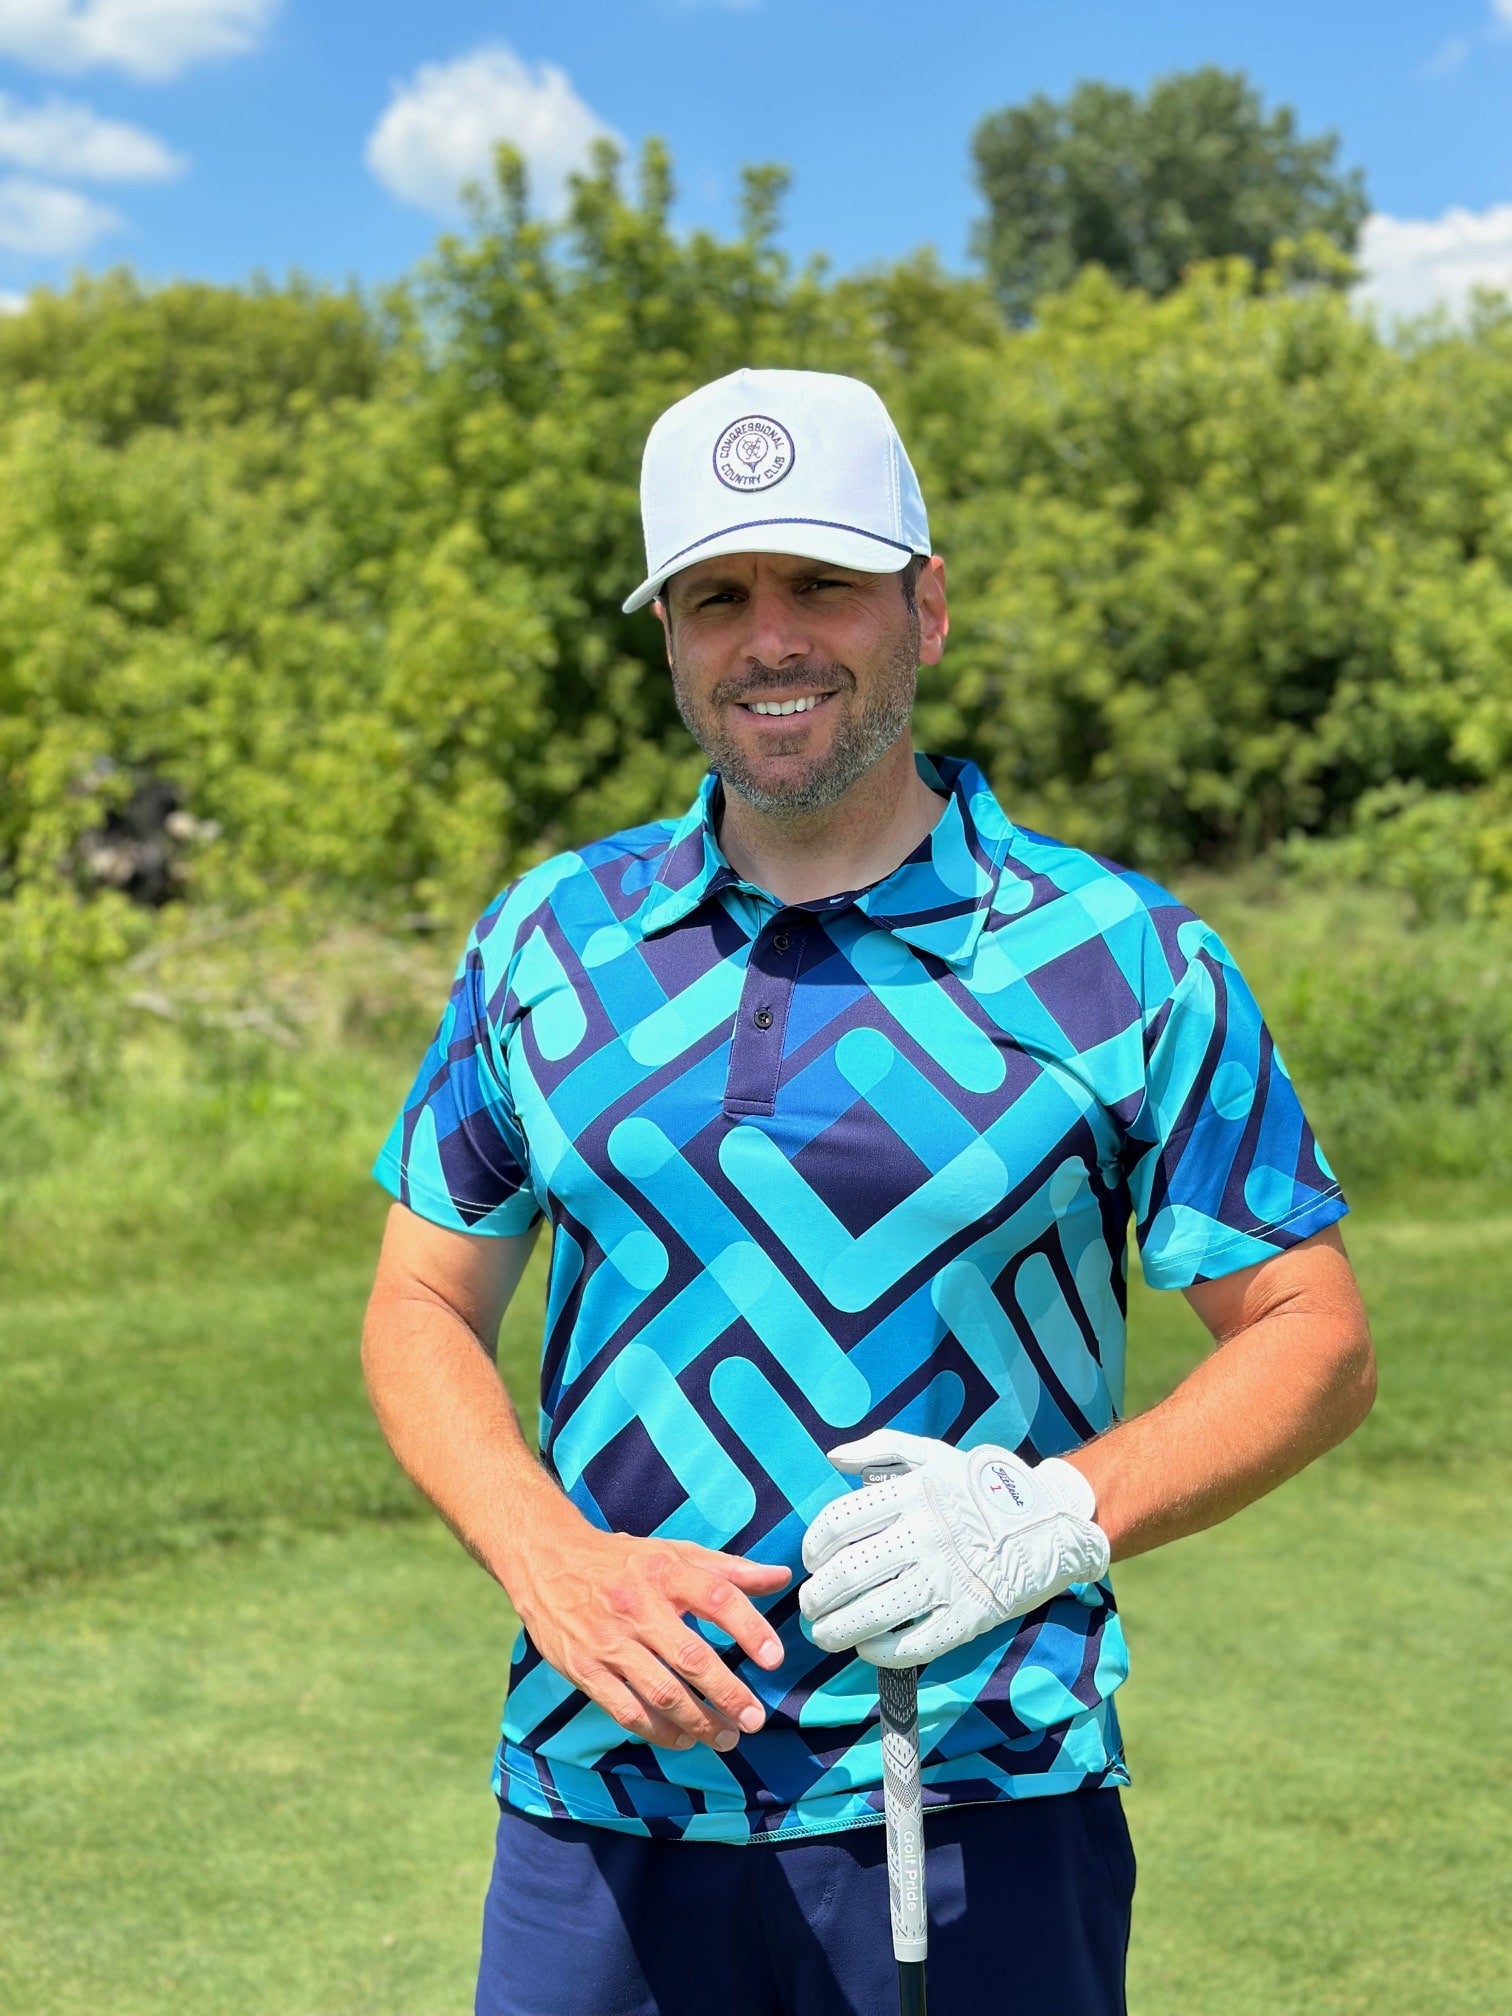 Independent Golf reviewer wearing the "course craze" golf shirt by KEA Golf on the golf course